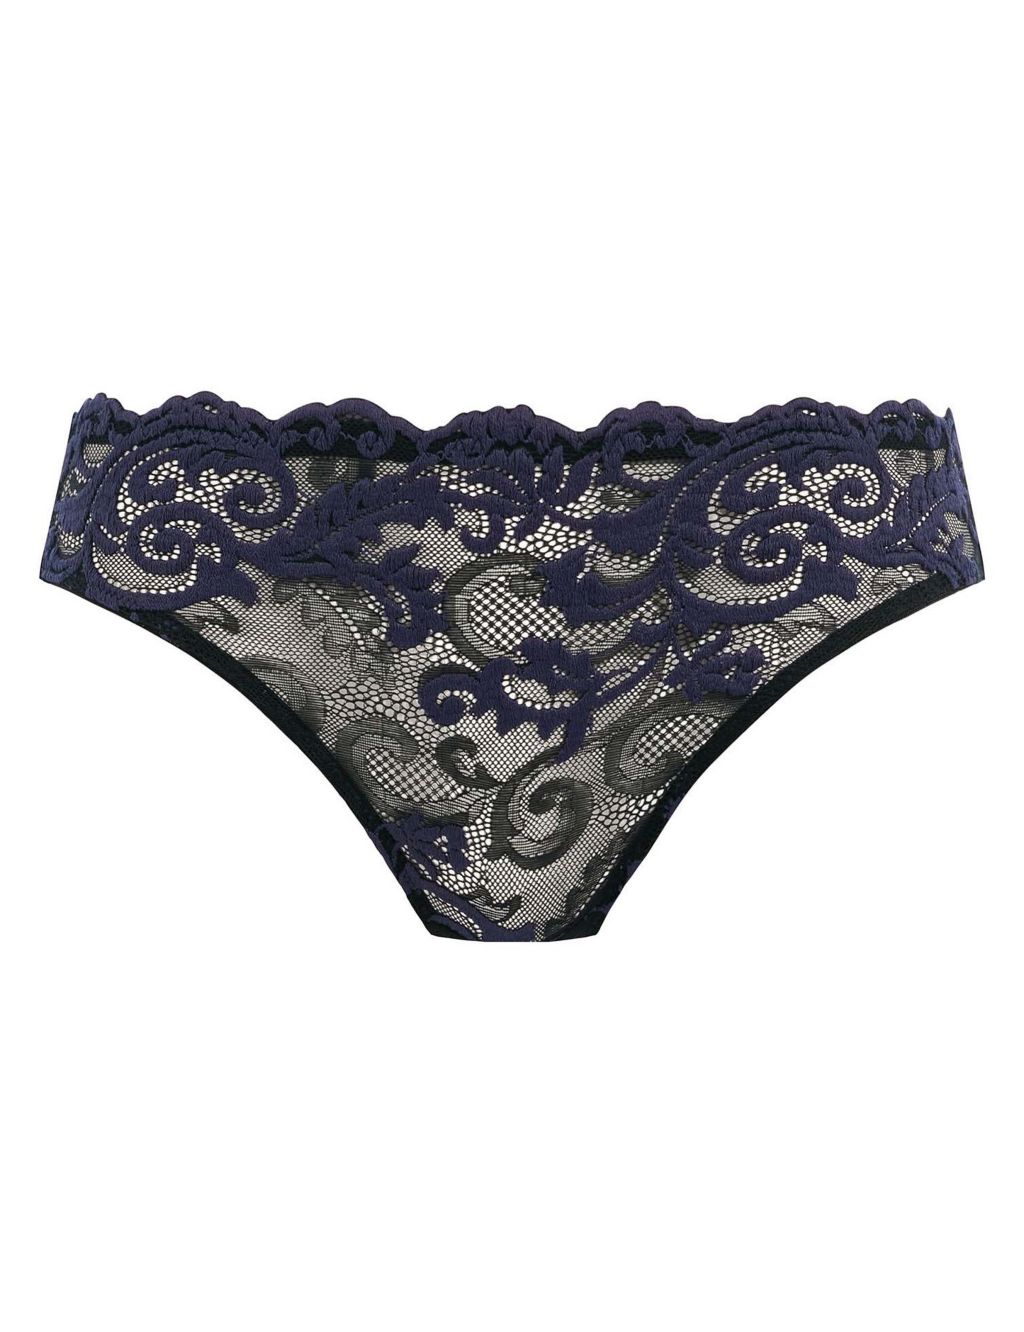 Instant Icon Floral Lace Bikini Knickers image 2